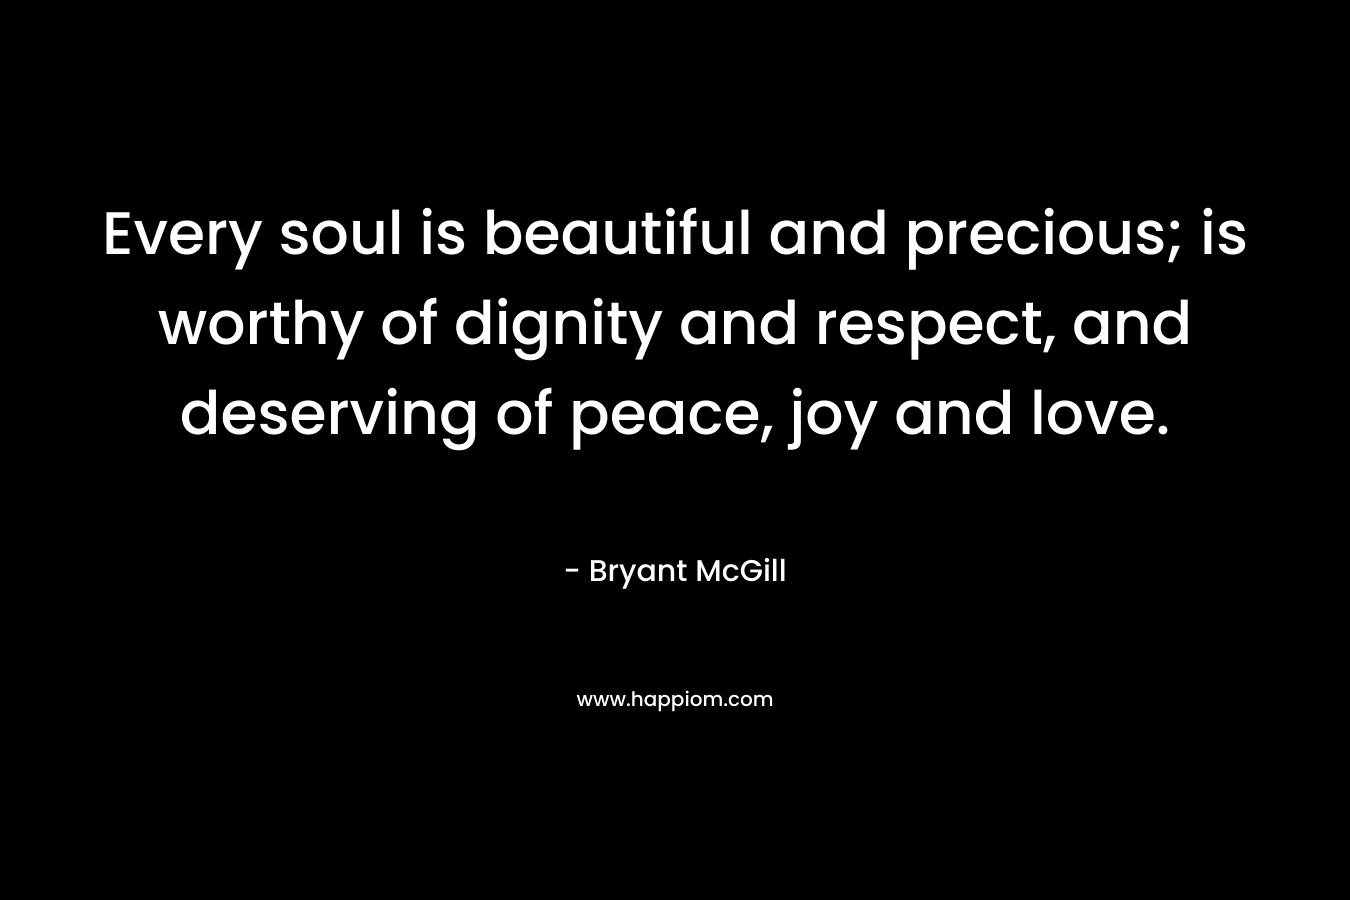 Every soul is beautiful and precious; is worthy of dignity and respect, and deserving of peace, joy and love.